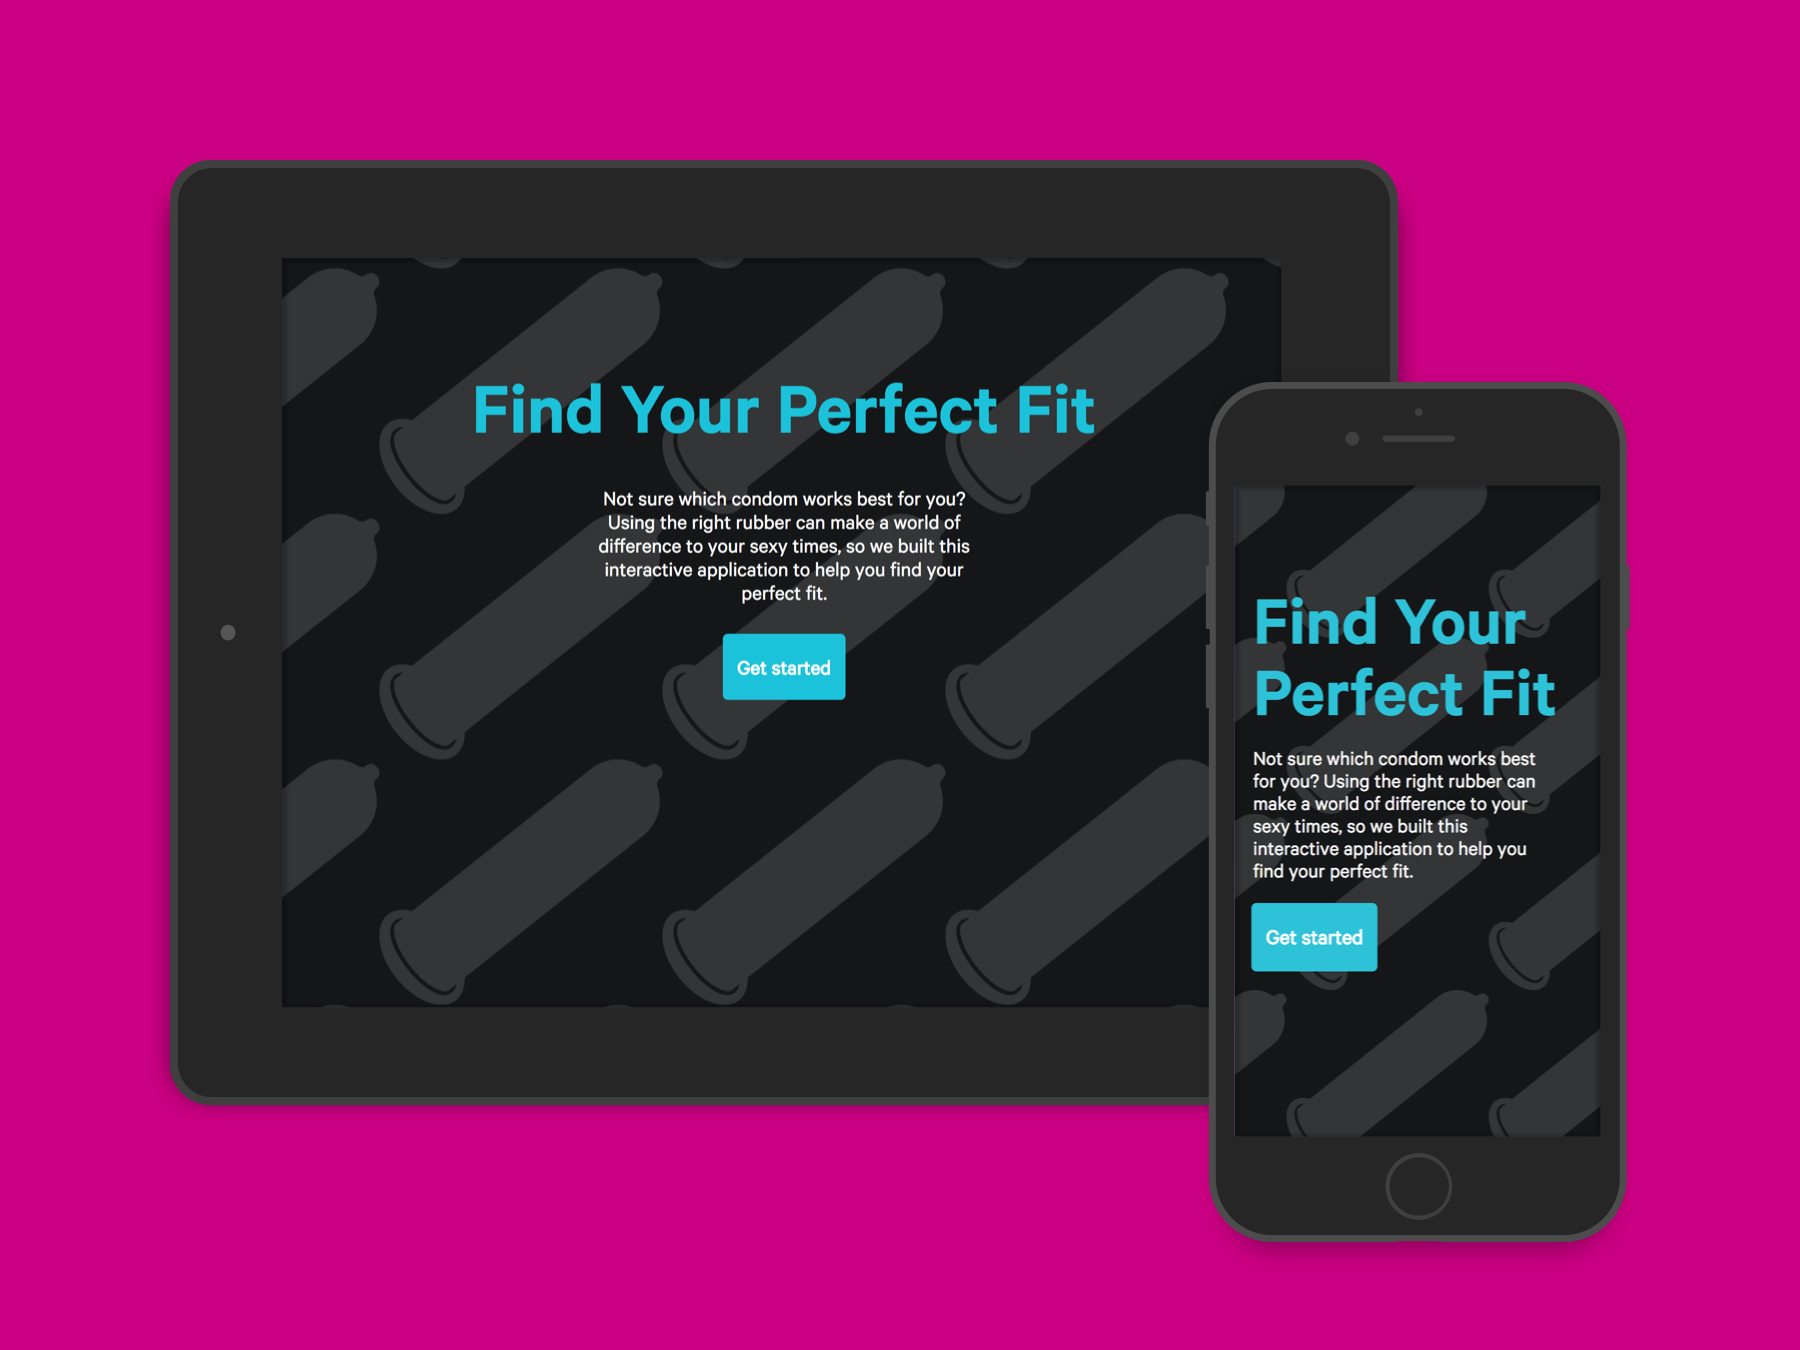 Find Your Perfect Fit app